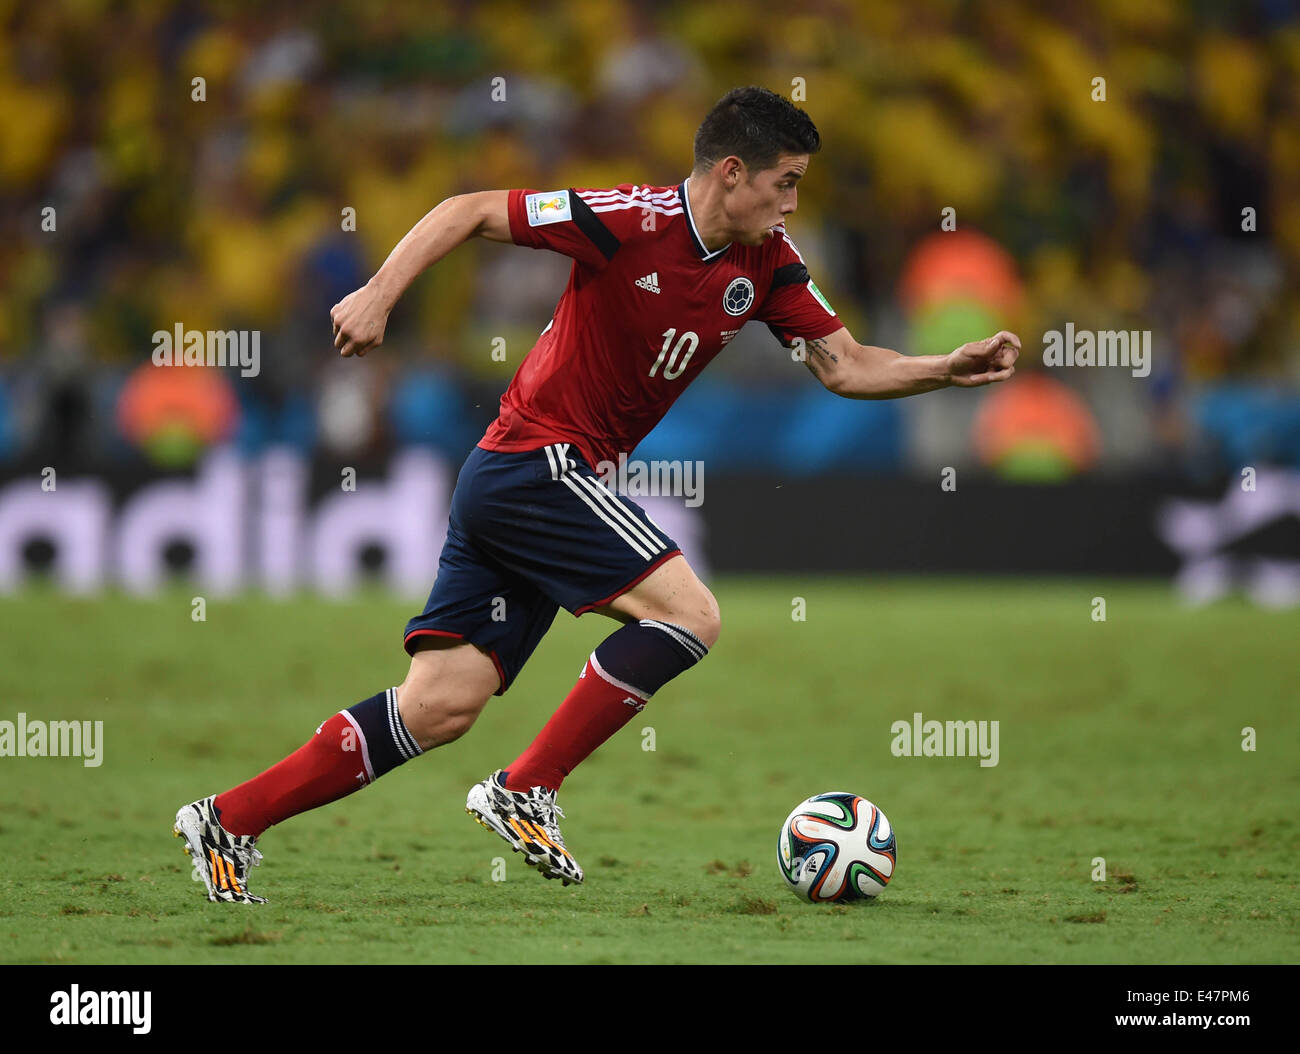 Fortaleza, Brazil. 04th July, 2014. James Rodriguez of Colombia in action during the FIFA World Cup 2014 quarter final match soccer between Brazil and Colombia in Fortaleza, Brazil, 04 July 2014. Photo: Marius Becker/dpa/Alamy Live News Stock Photo